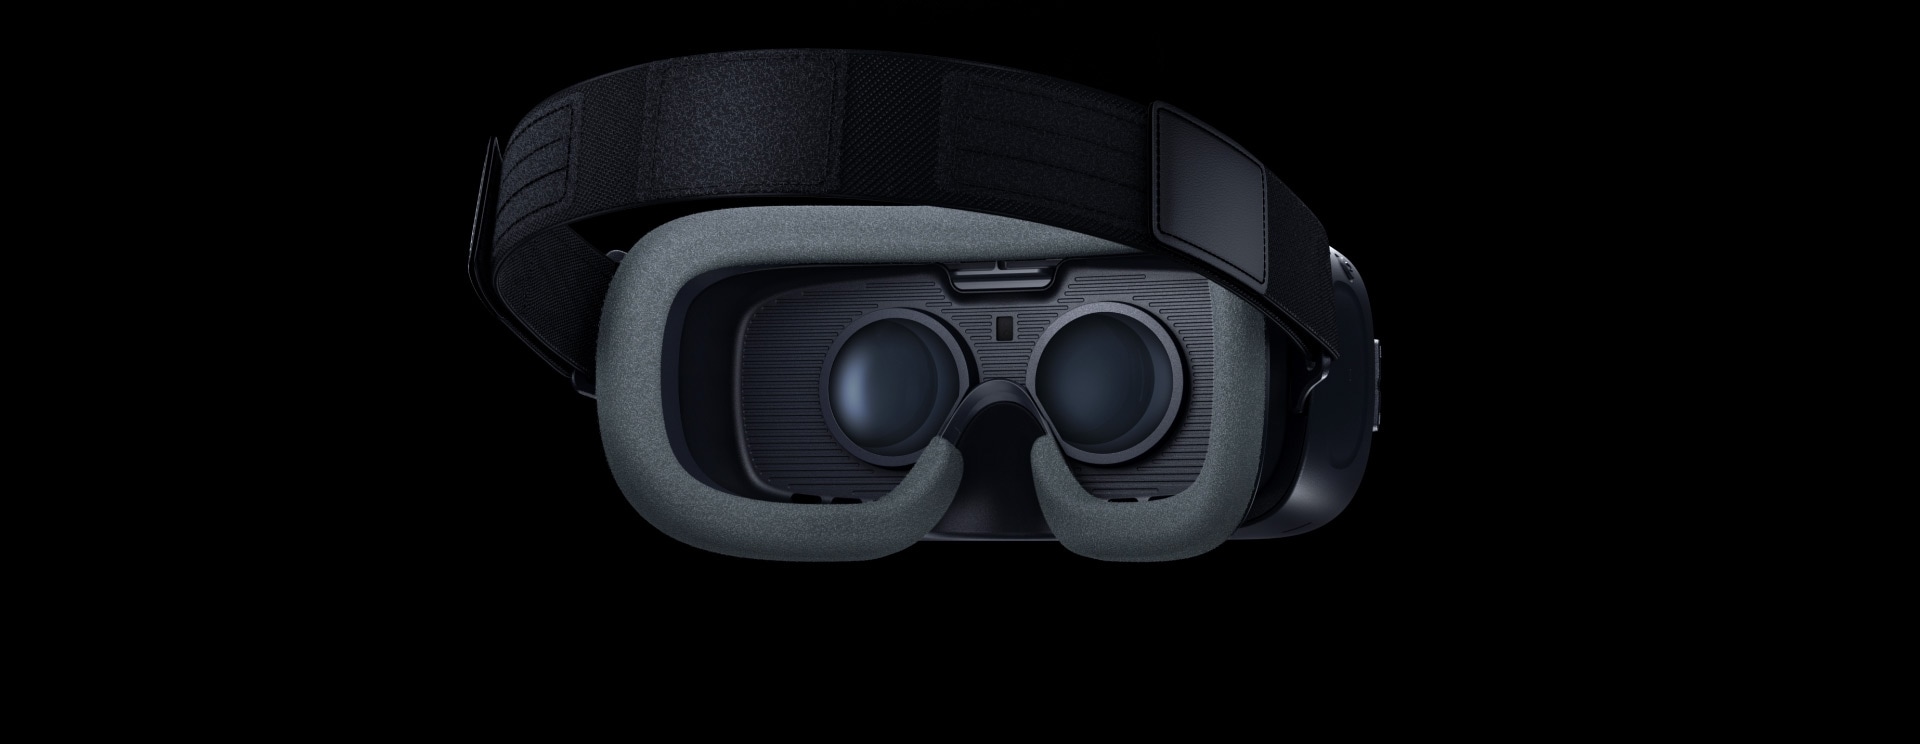 Gear VR seen from behind showing the inner lens, foam cushioning and strap holder